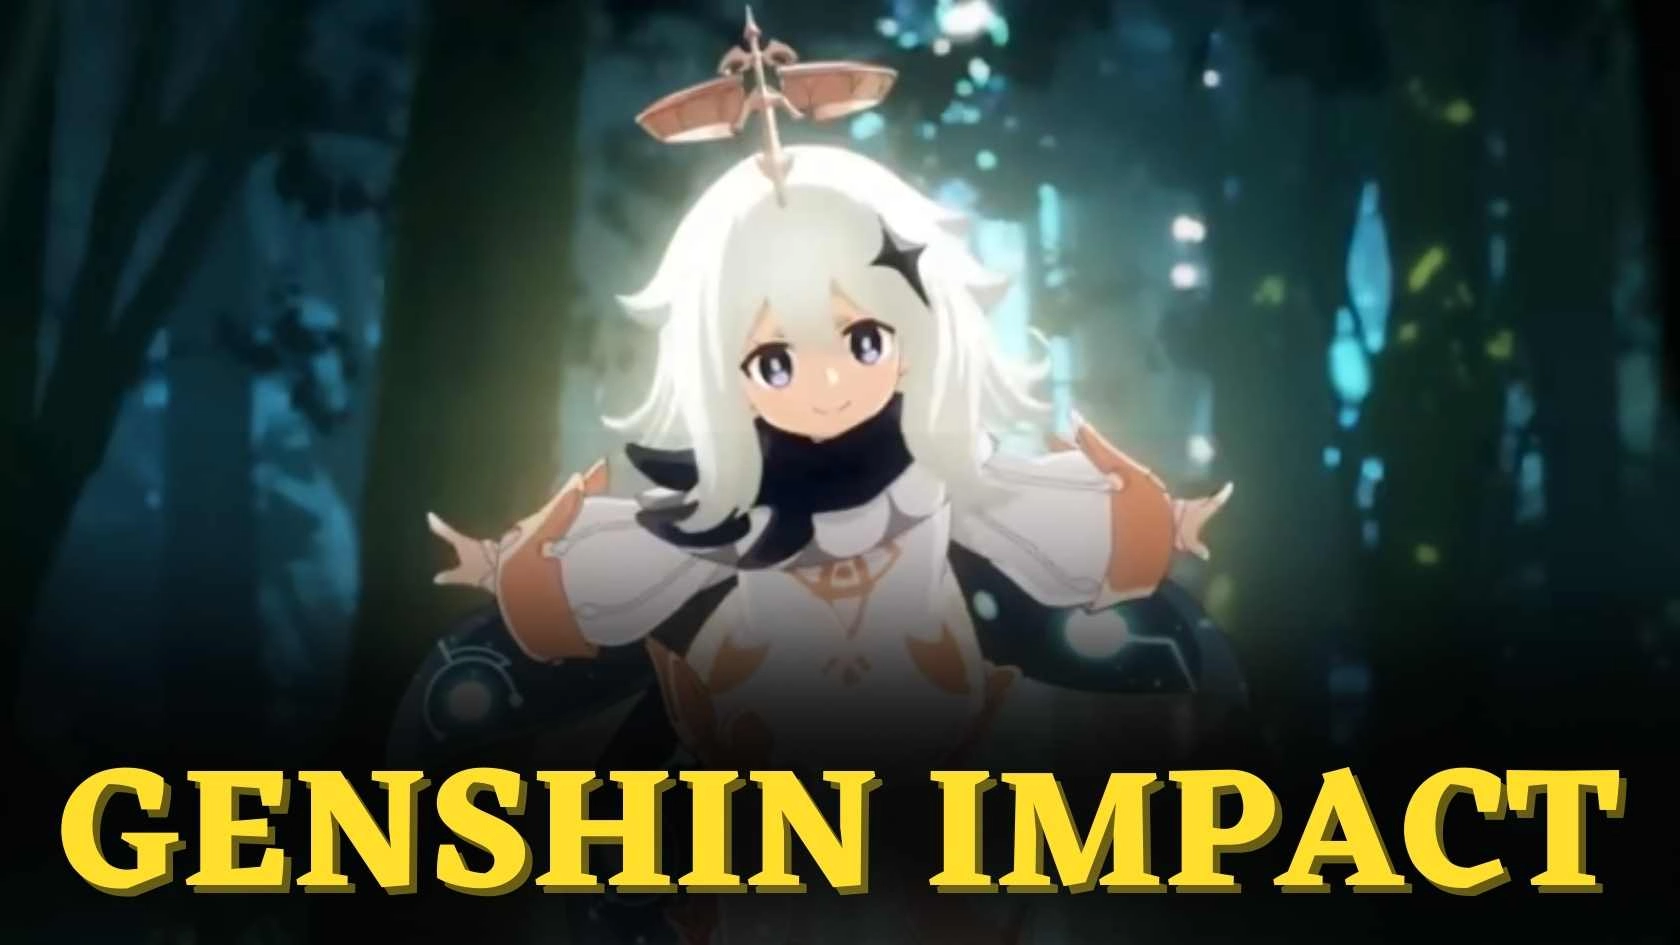 Genshin Impact Series Parents Guide and Age Rating (2019)